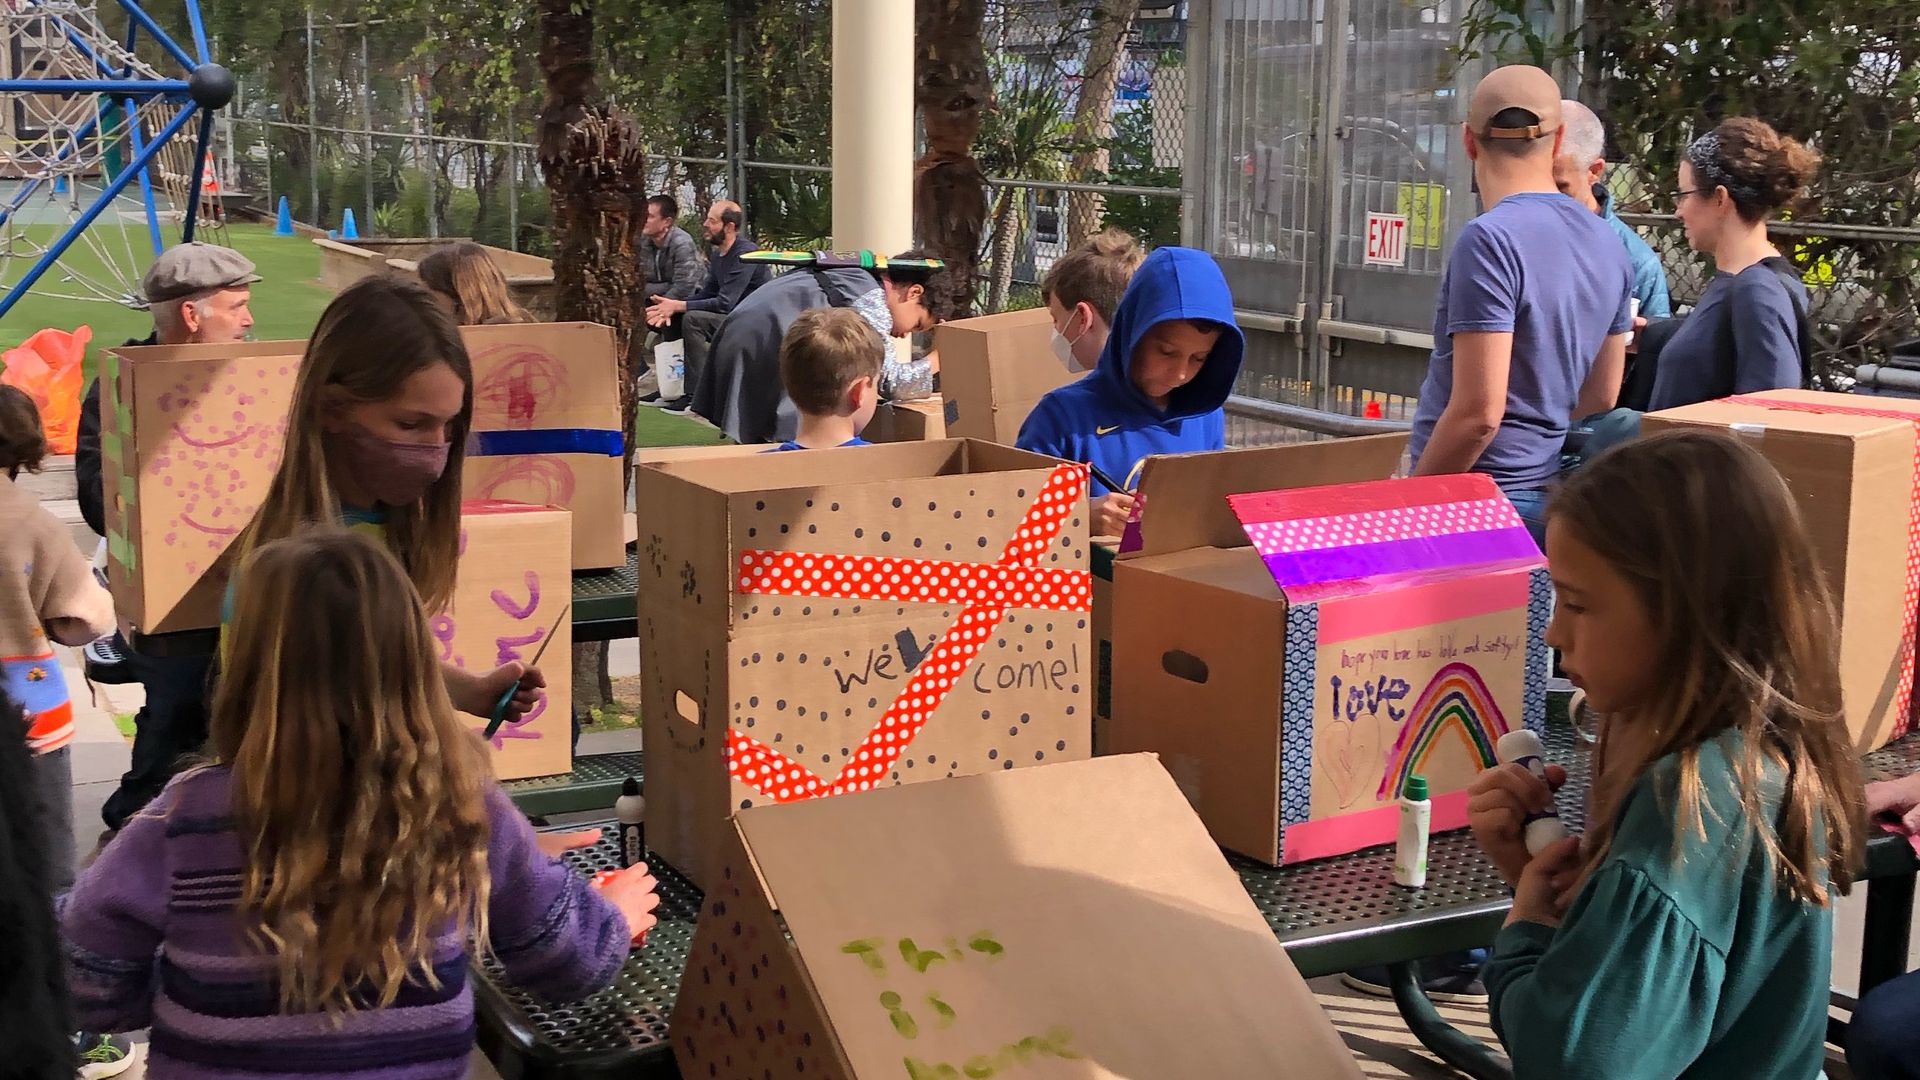 Children sit at picnic tables decorating cardboard boxes on a school playground.